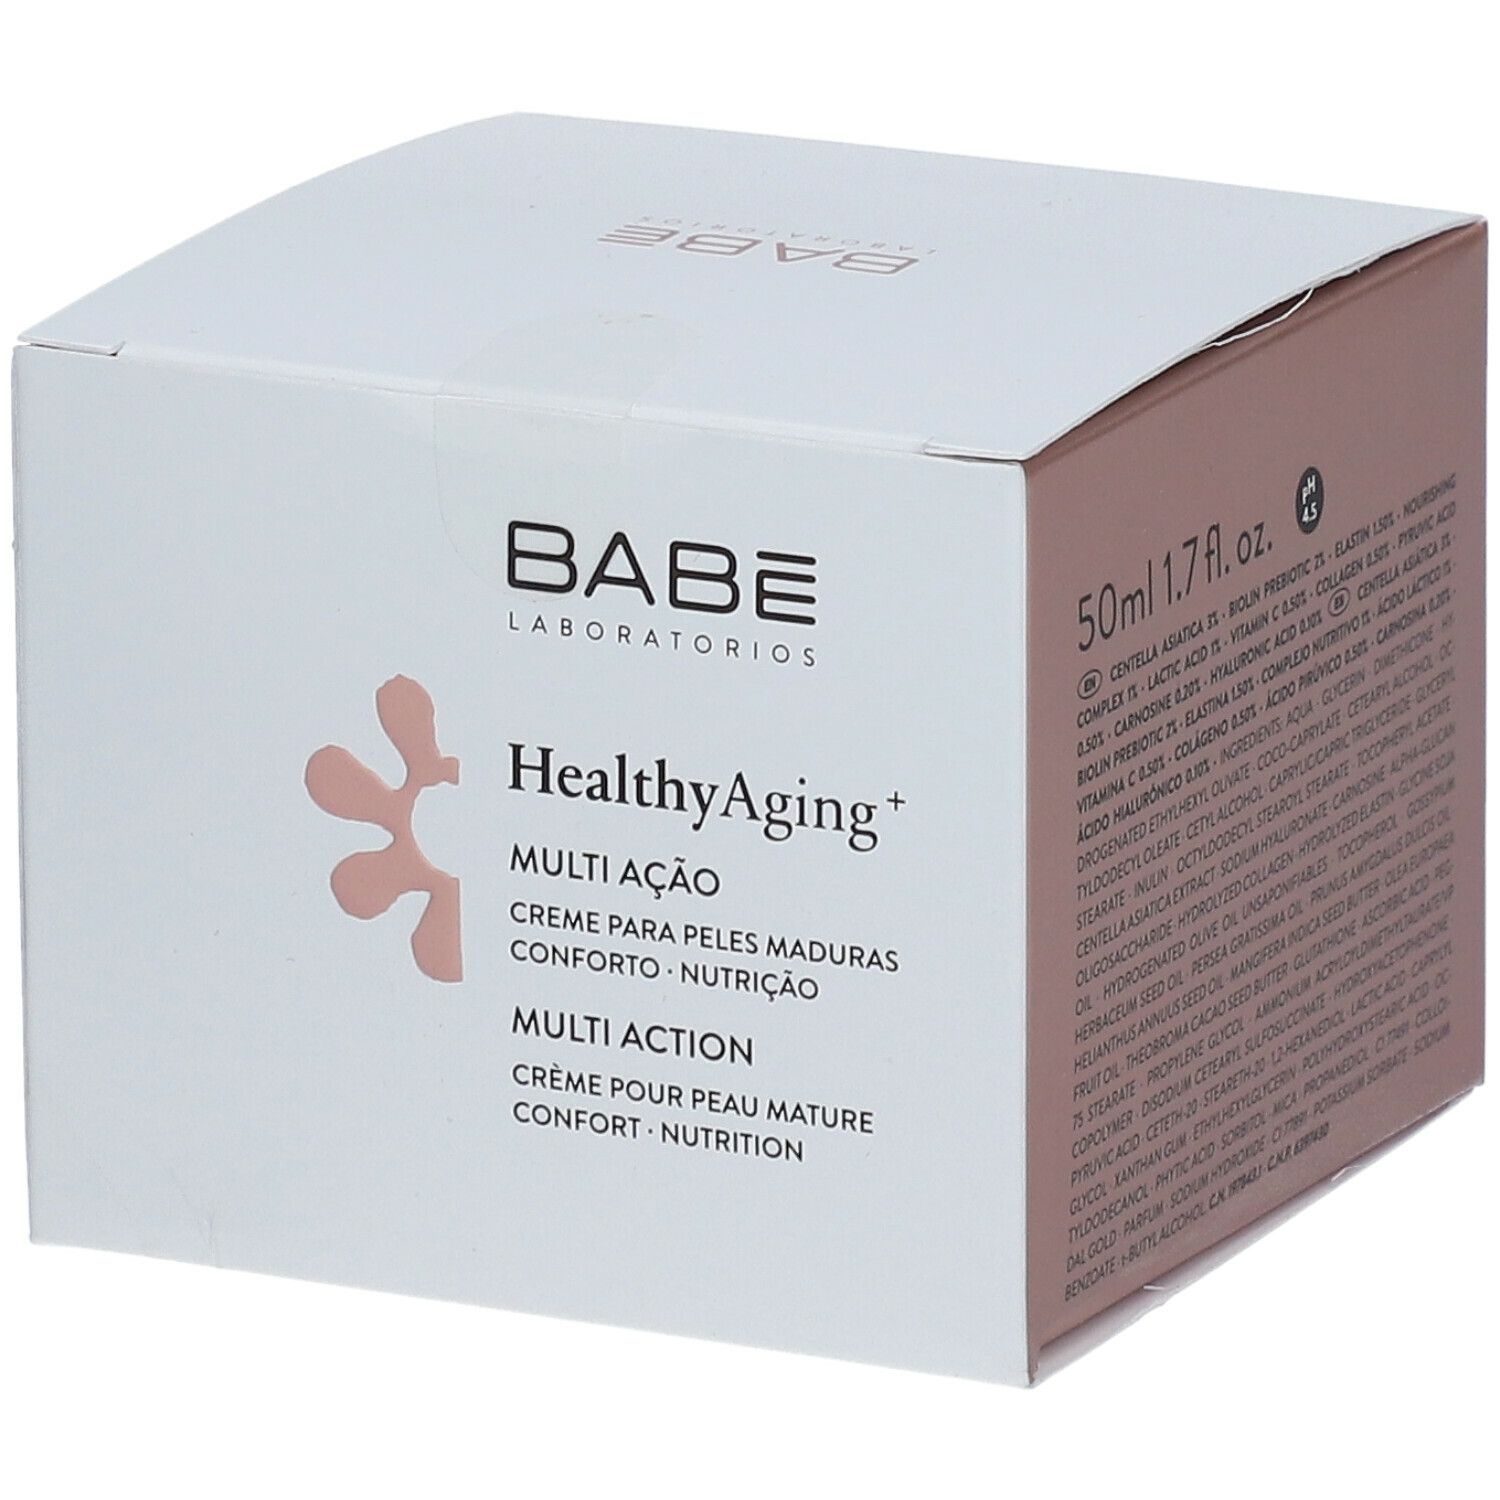 Babé HealthyAging+ Multi-Action Cream for Mature Skin